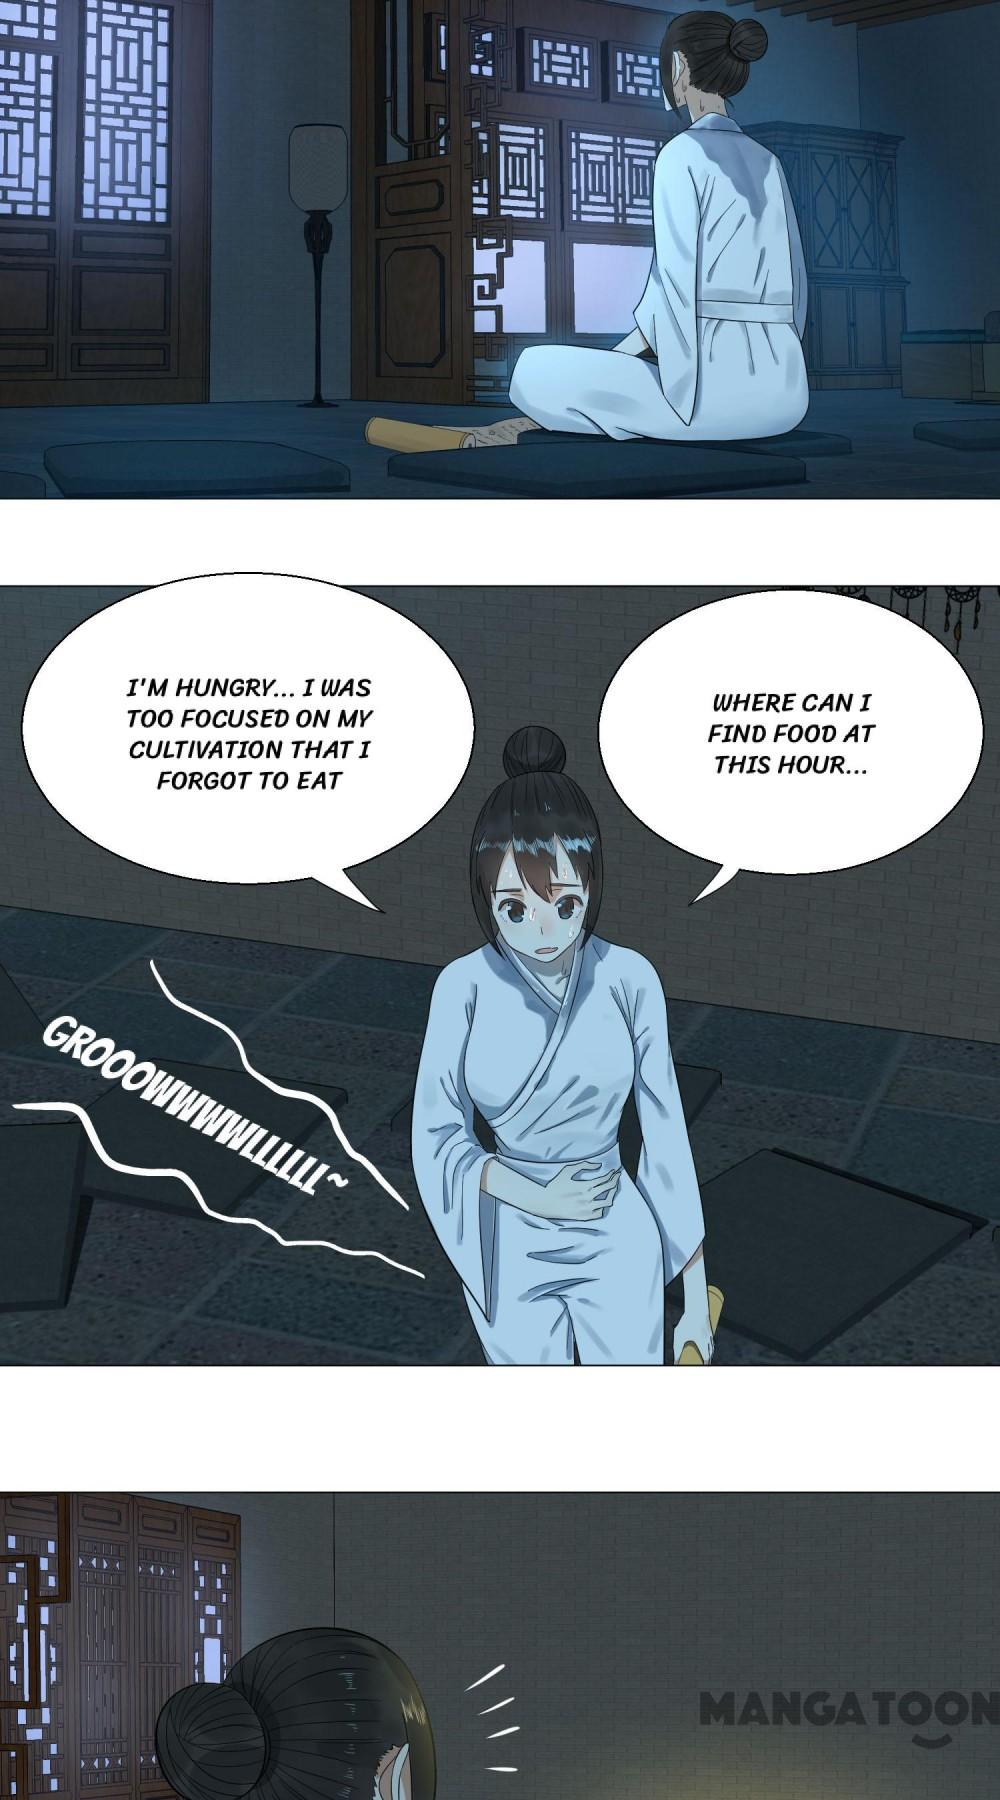 My Three Thousand Years To The Sky - Page 2